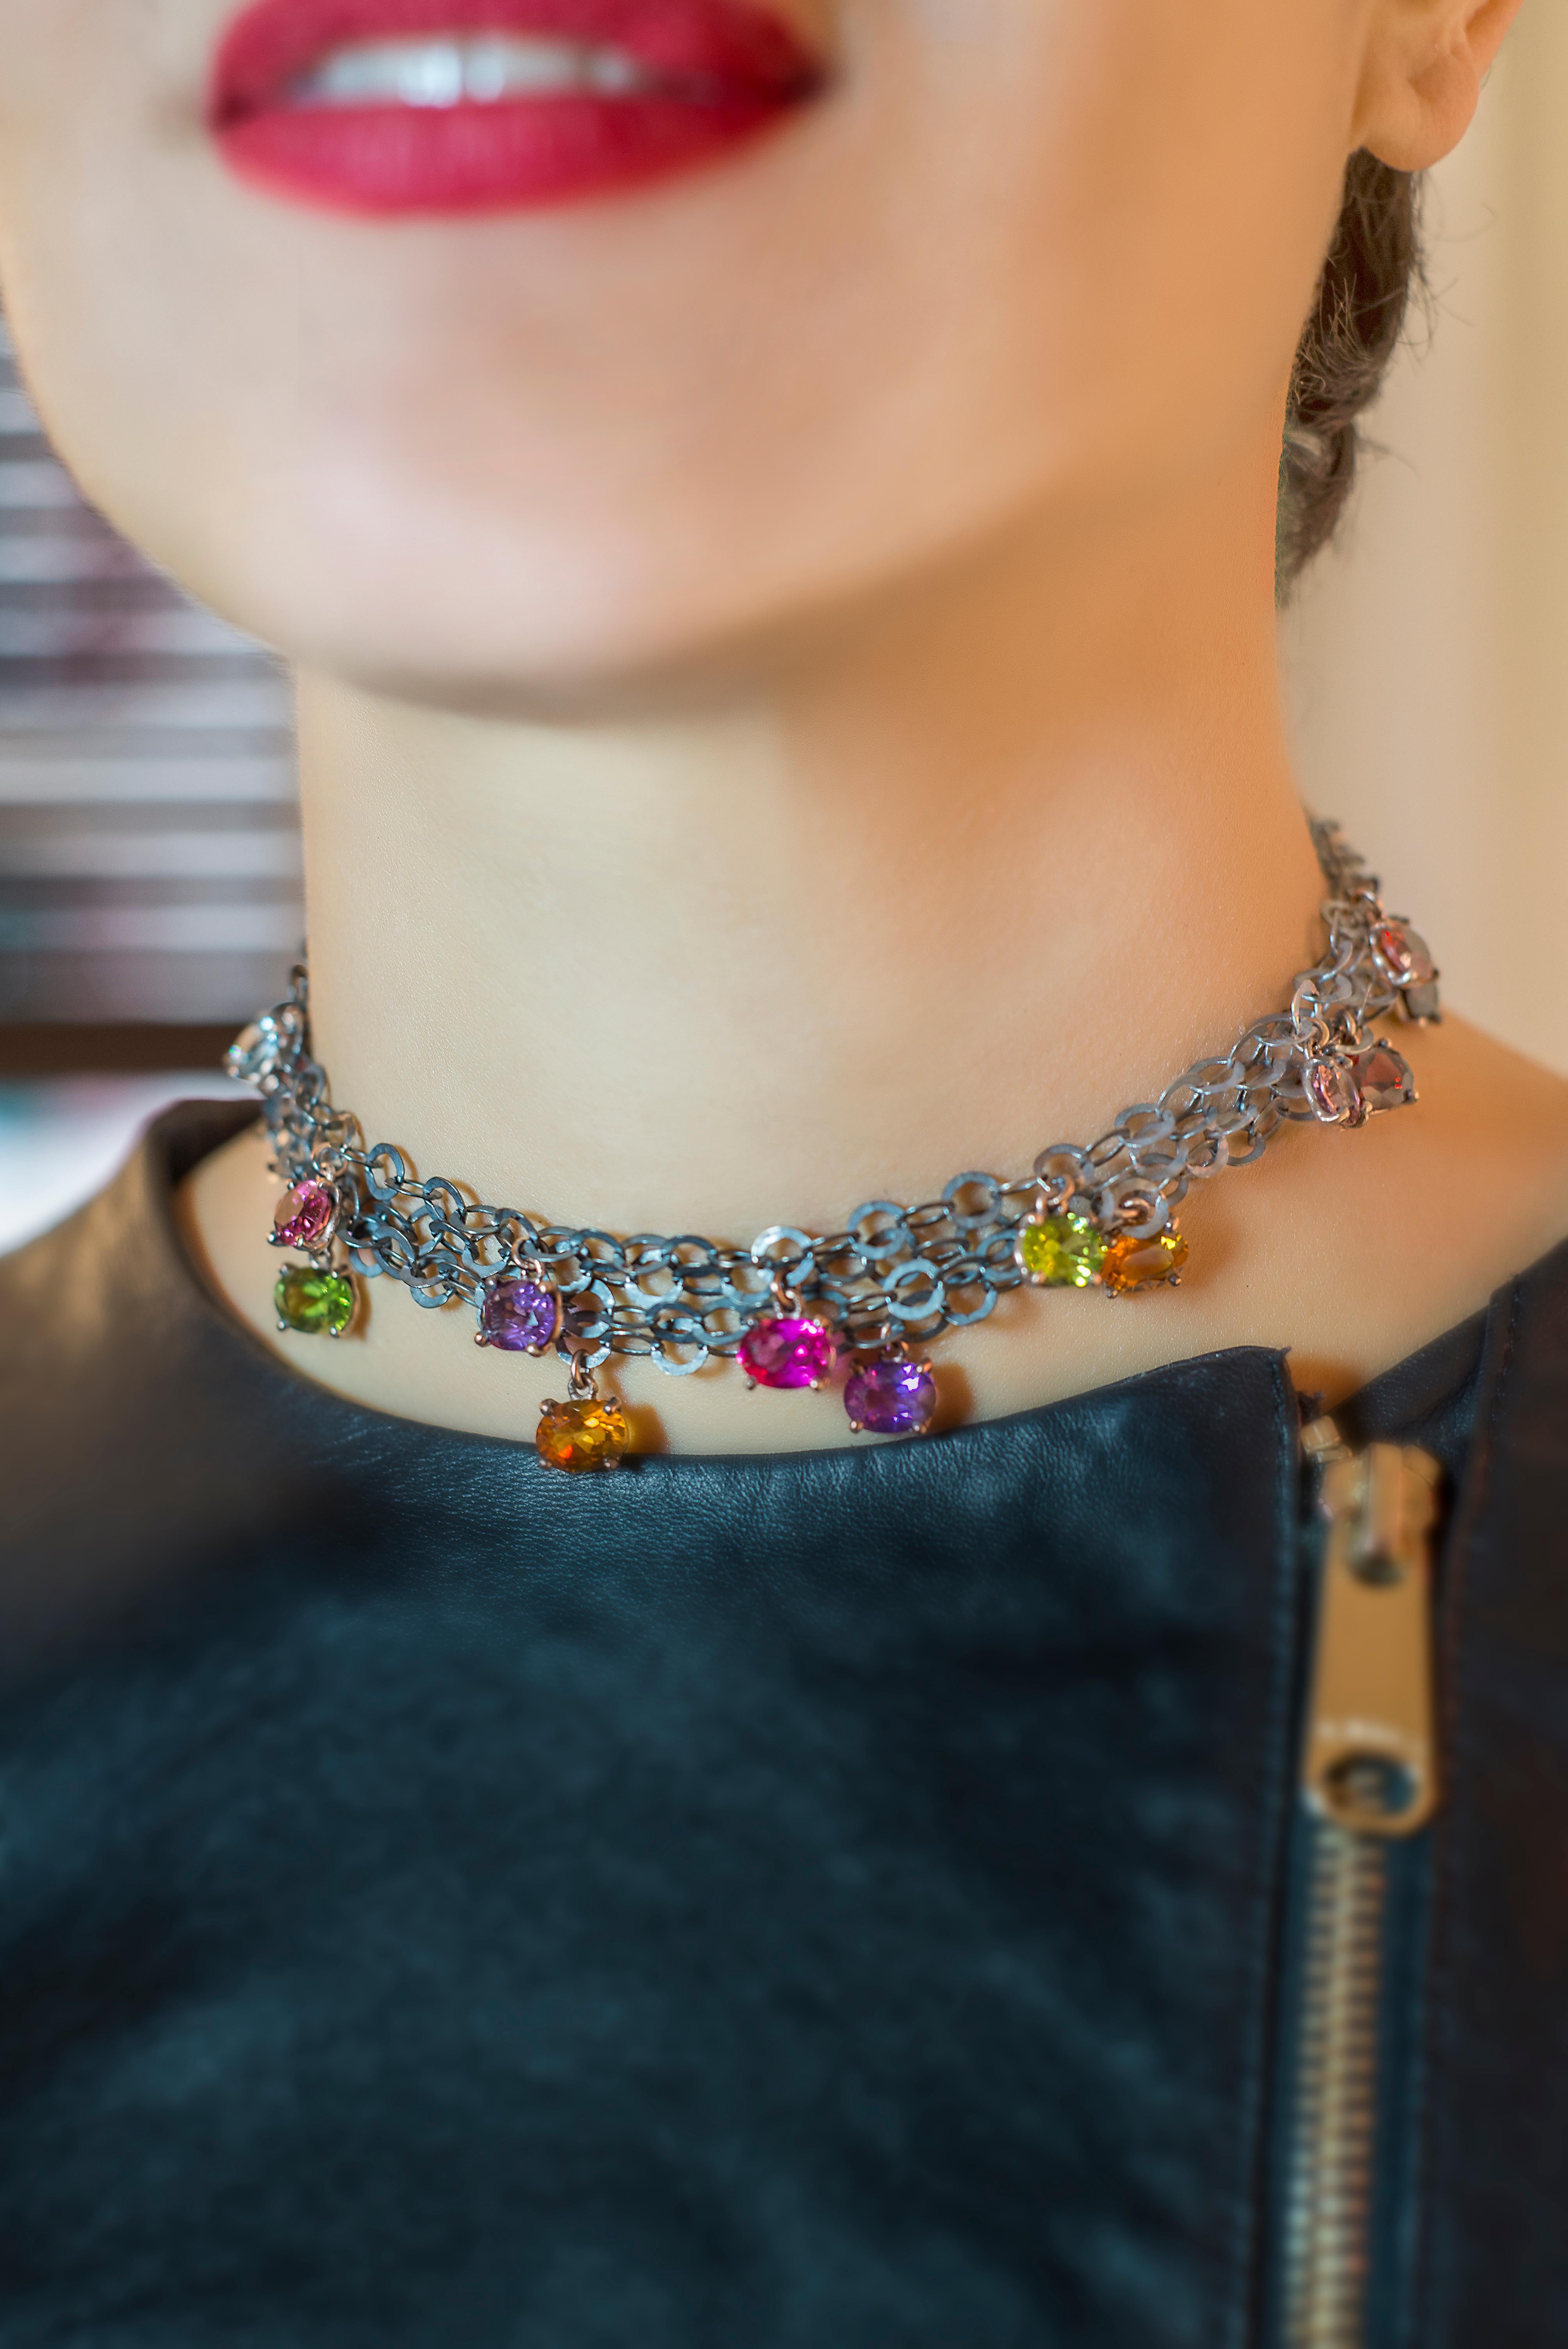 Rossella Ugolini design stunning choker necklace is a true work of art, handcrafted in Italy 
The burnished Silver Sterling link chain perfect complements the vibrant colored dangle stones, including Amethyst, Tourmaline, Rubellite, Iolite,